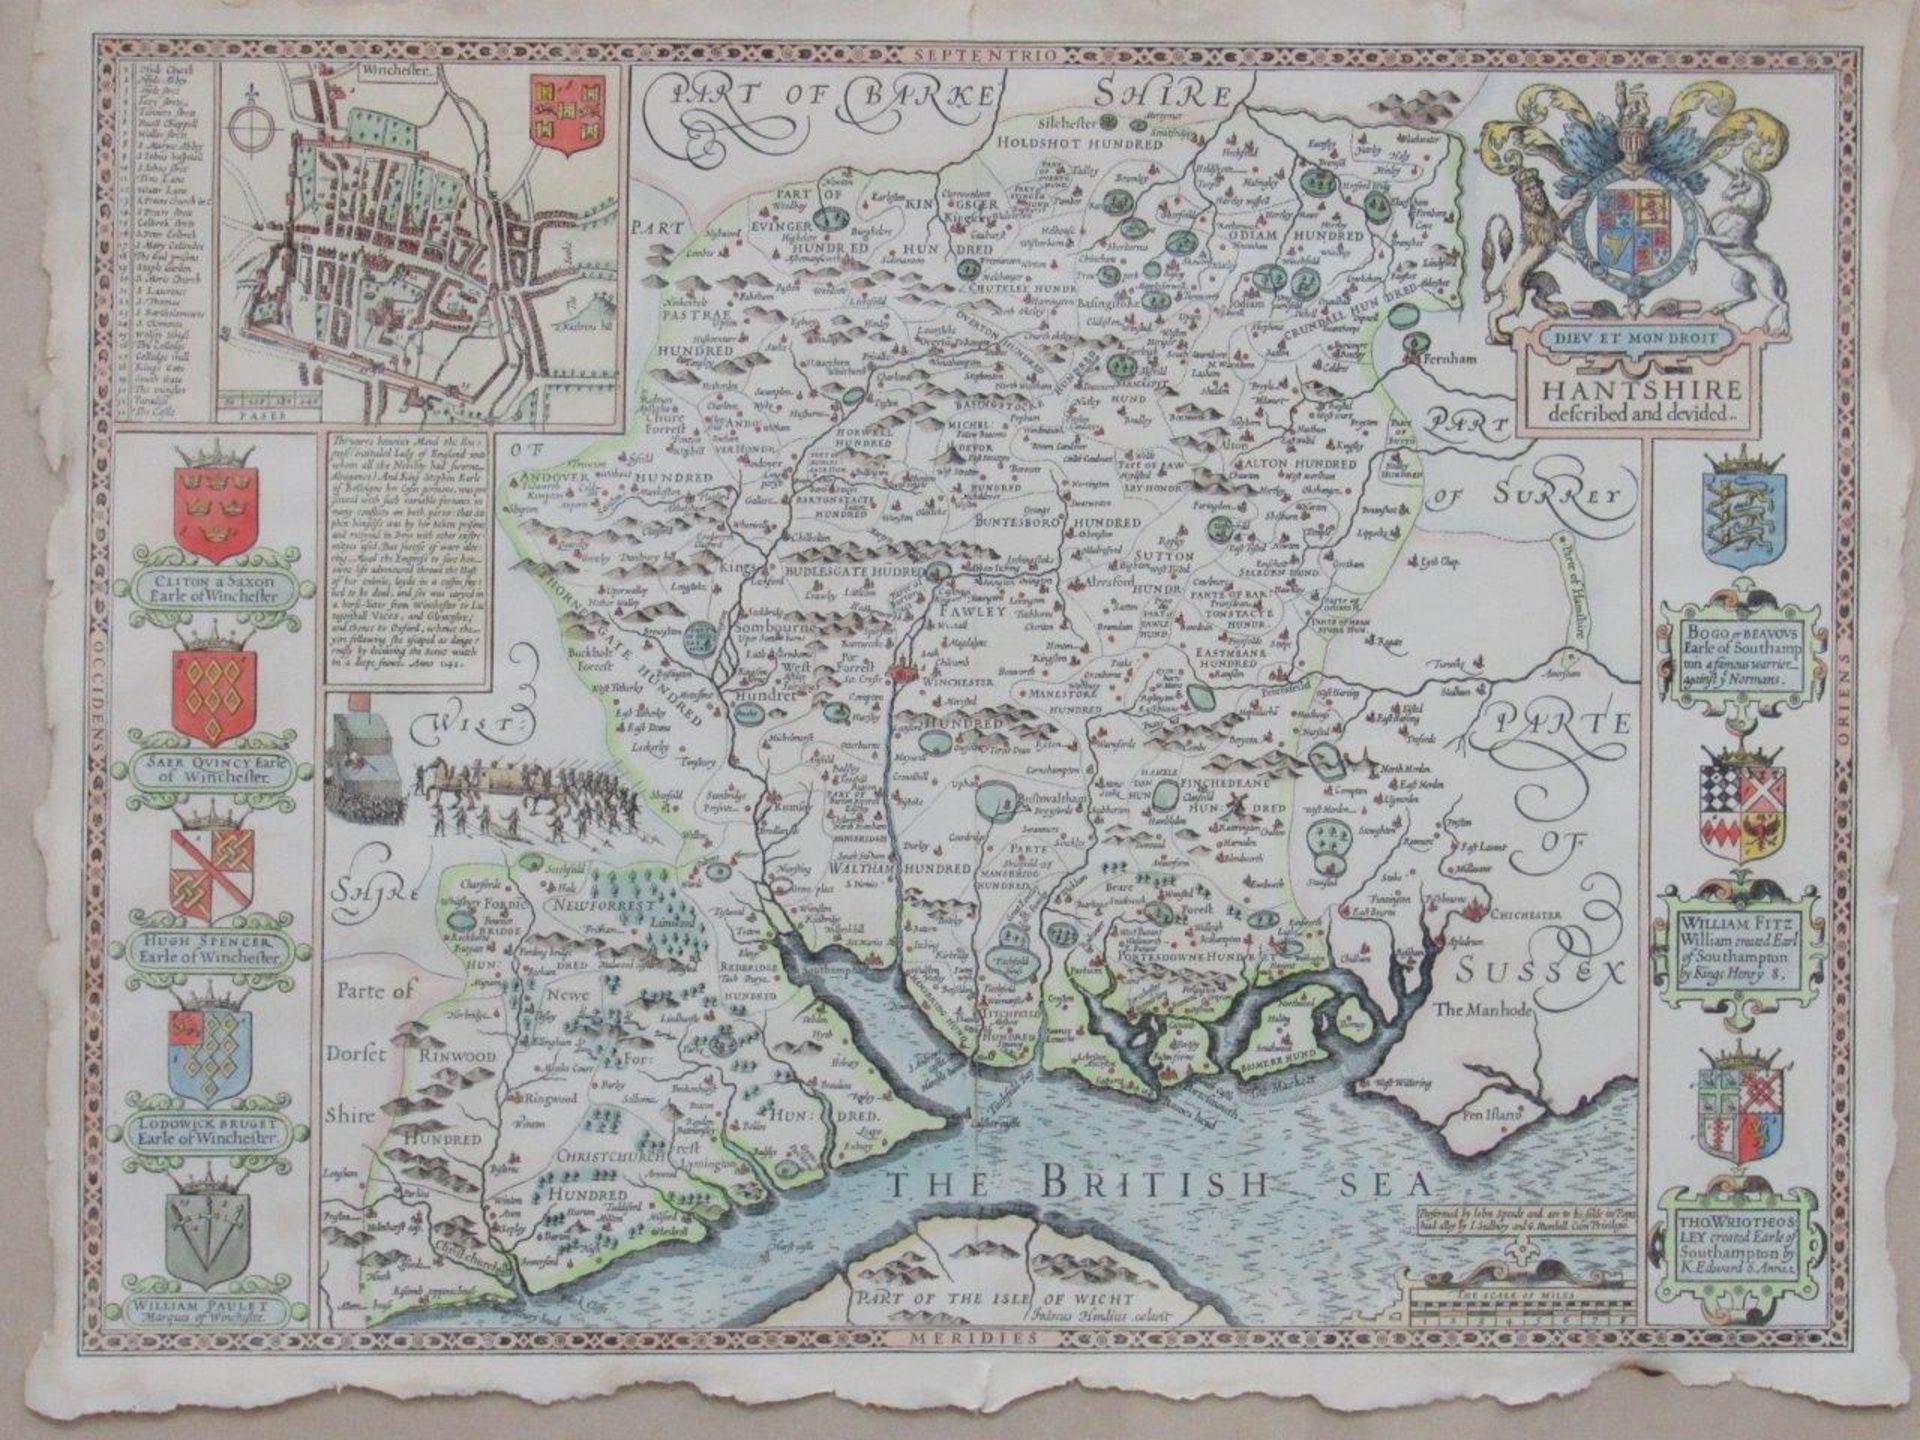 Framed and glazed map of Hampshire by John Speede. Estimate £30-50.